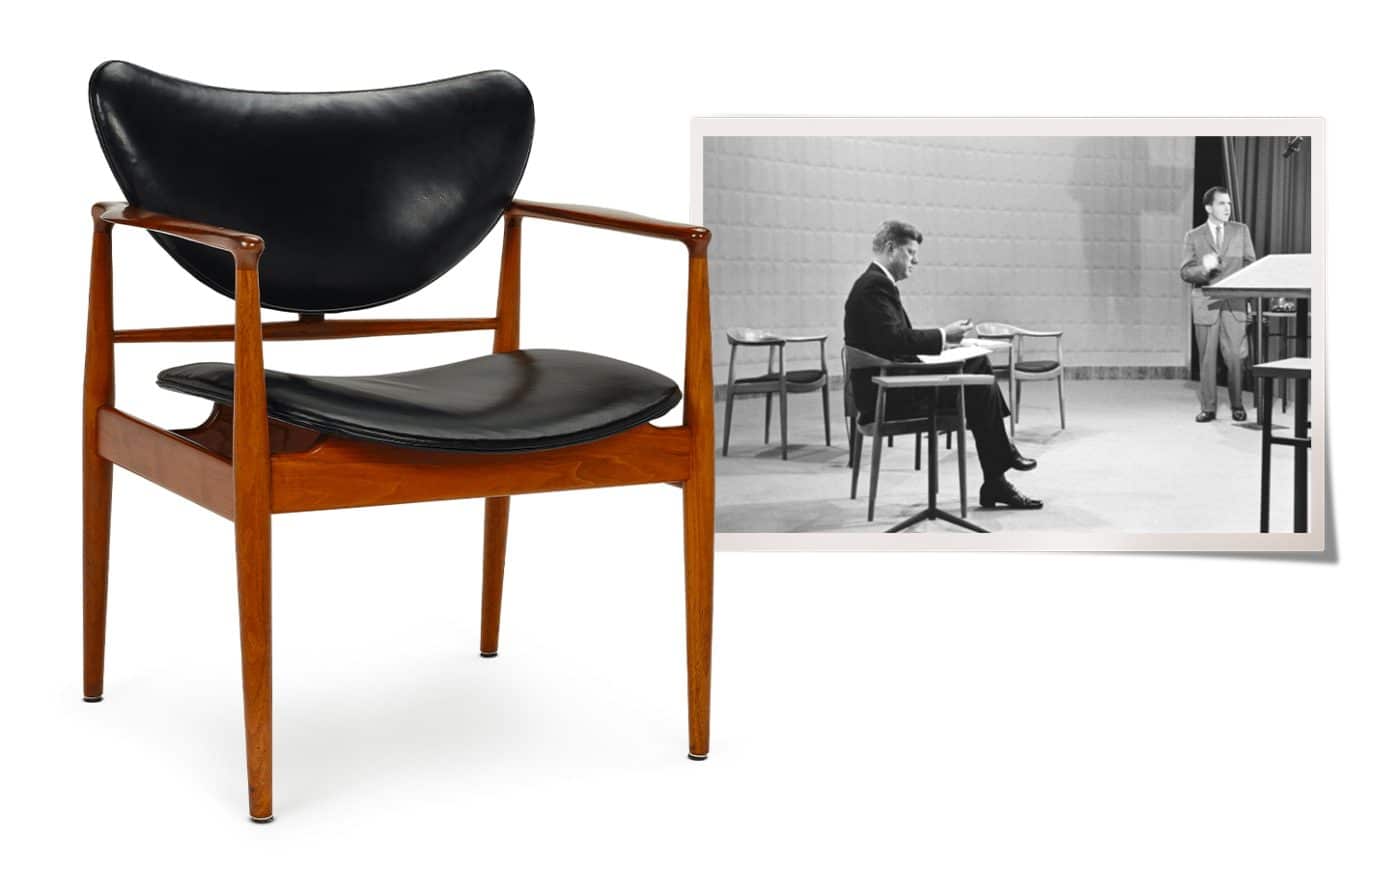 A Finn Juhl wood and leather chair next to a black-and-white photo of John F. Kennedy and Richard M. Nixon on stage with Hans Wegner chairs at the first televised presidential debate